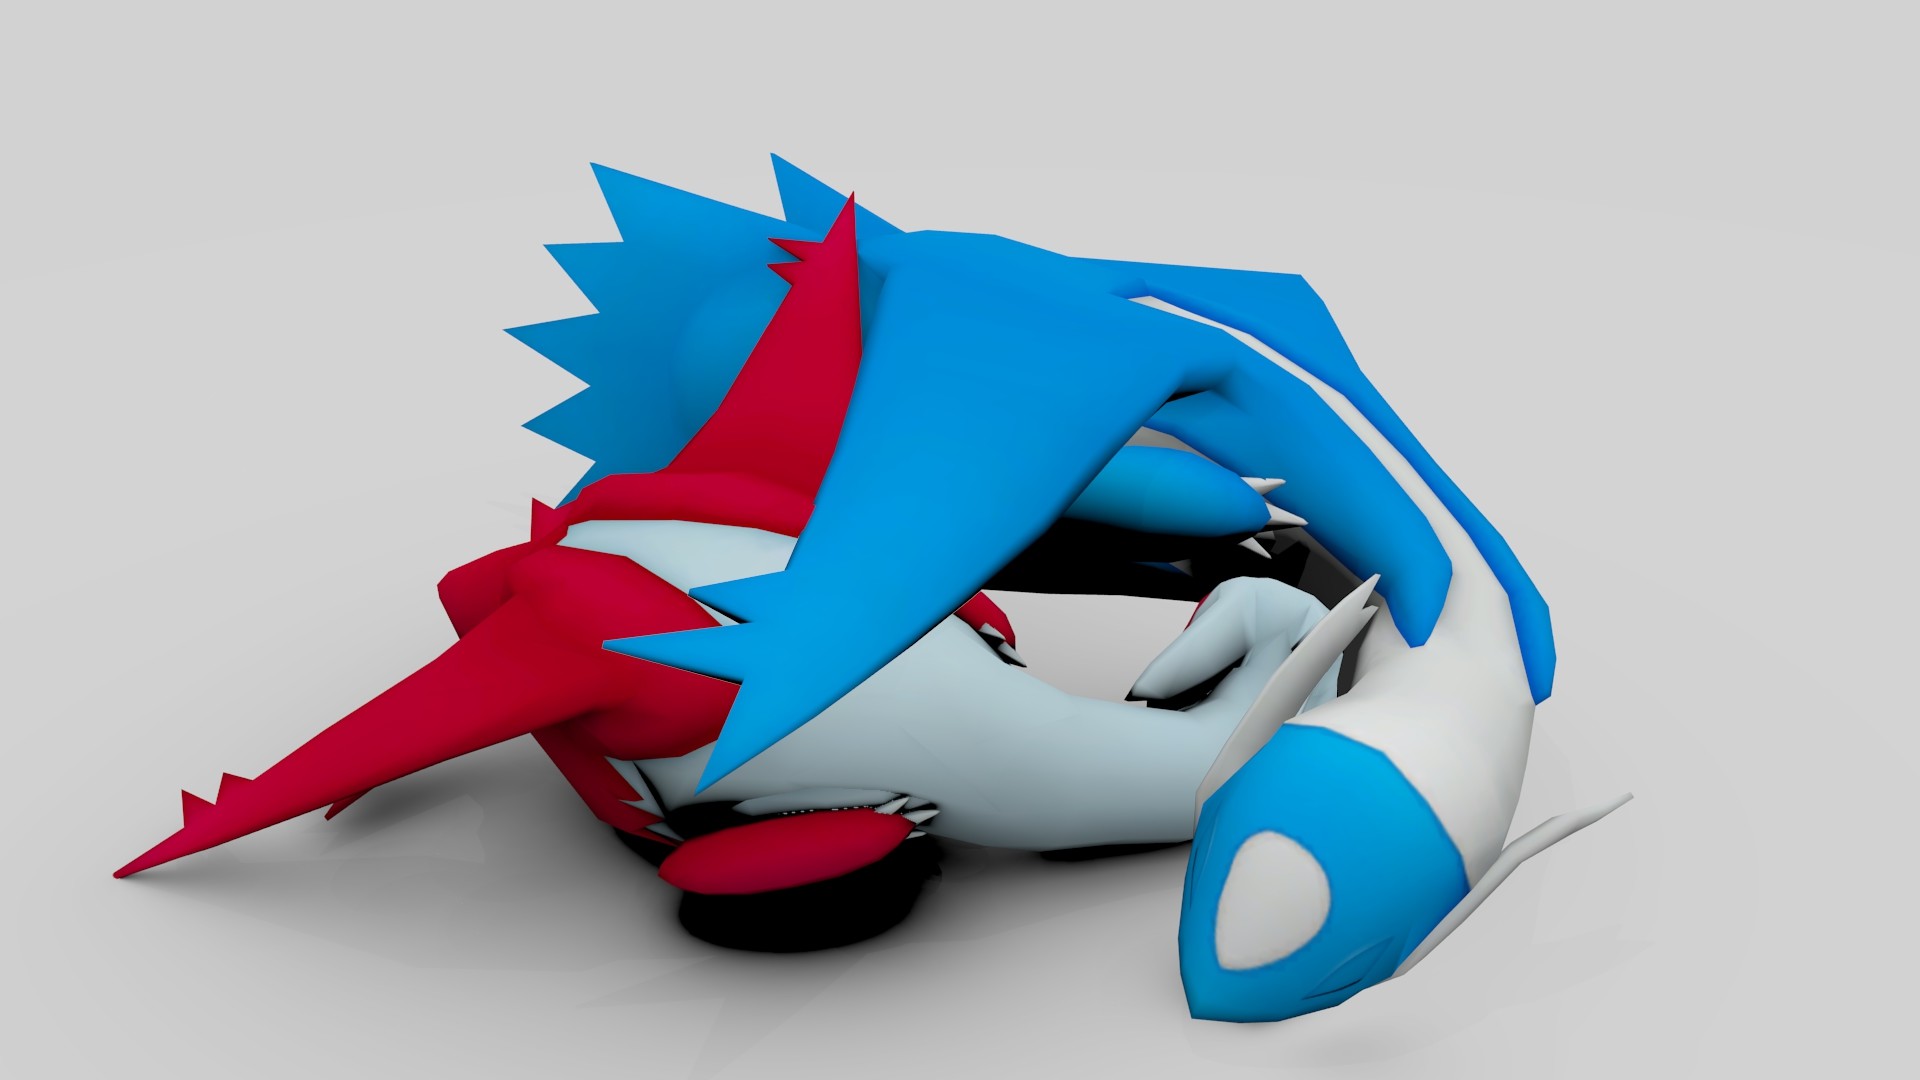 1920x1080 HD image of the Latios 3D Model available at ROEStudios.co.uk